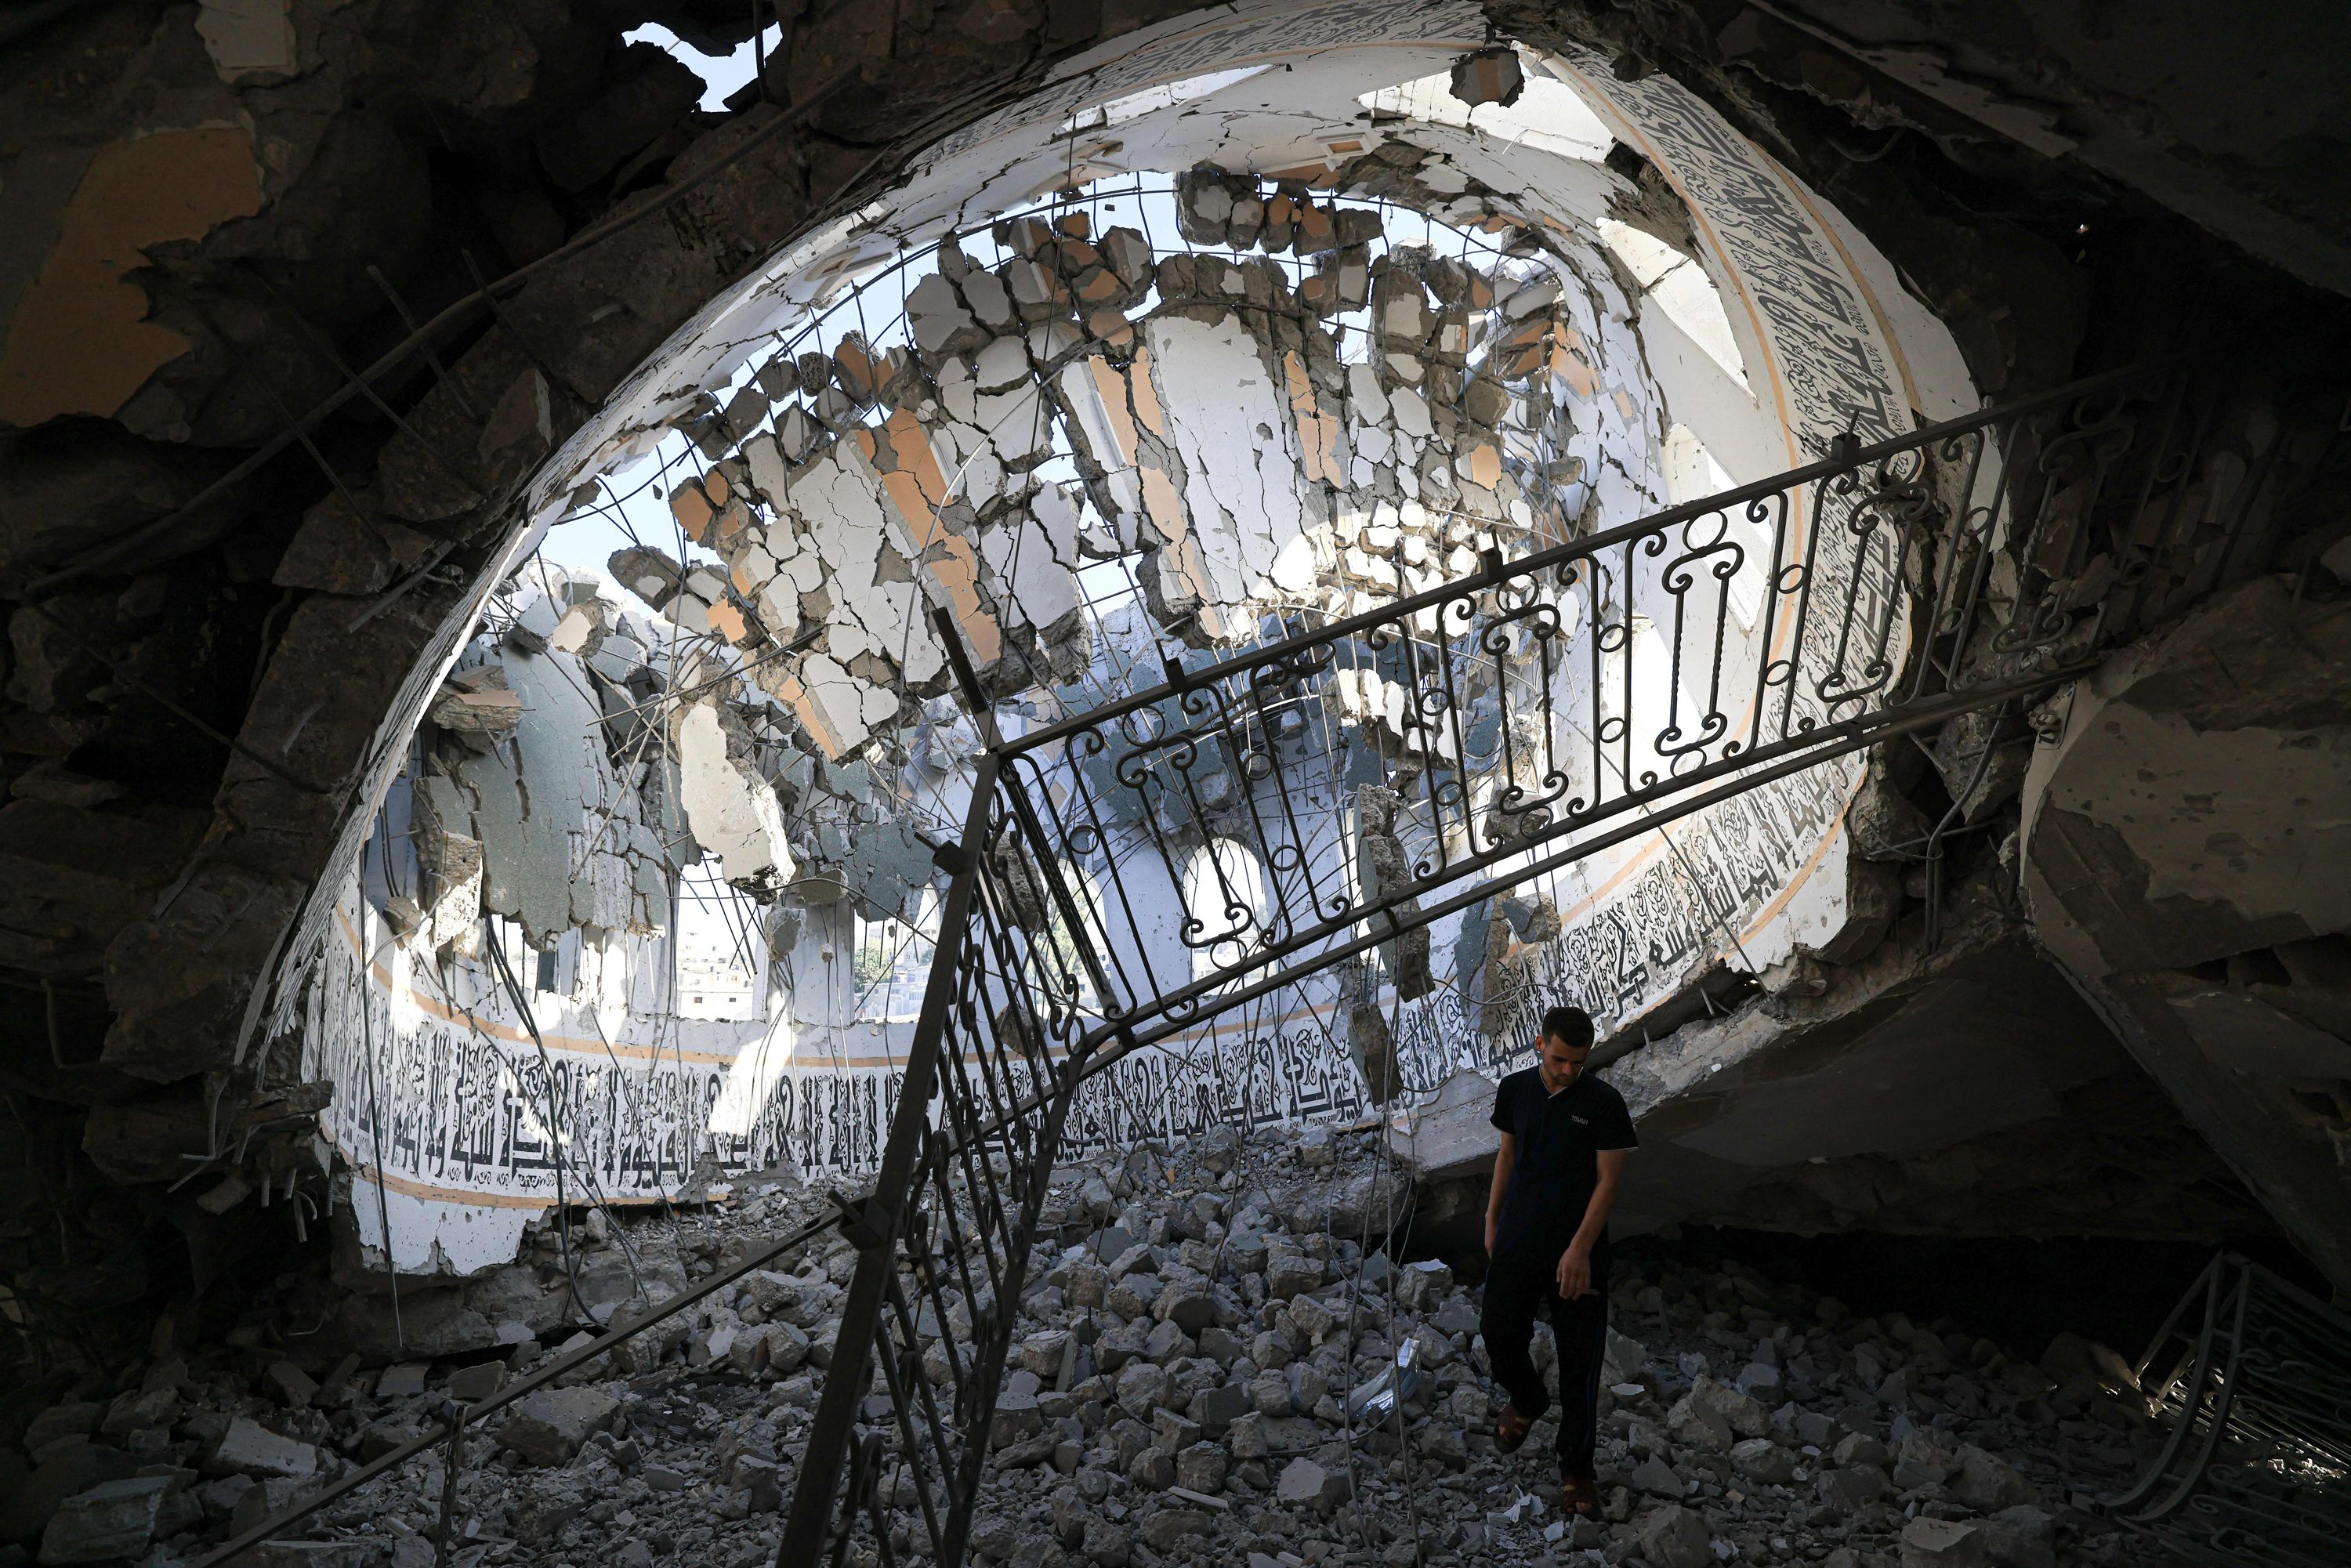 Palestinians inspect debris at the Khaled Ibn Al-Walid mosque after it was hit by an Israeli bombardment in Khan Younis, on November 8.